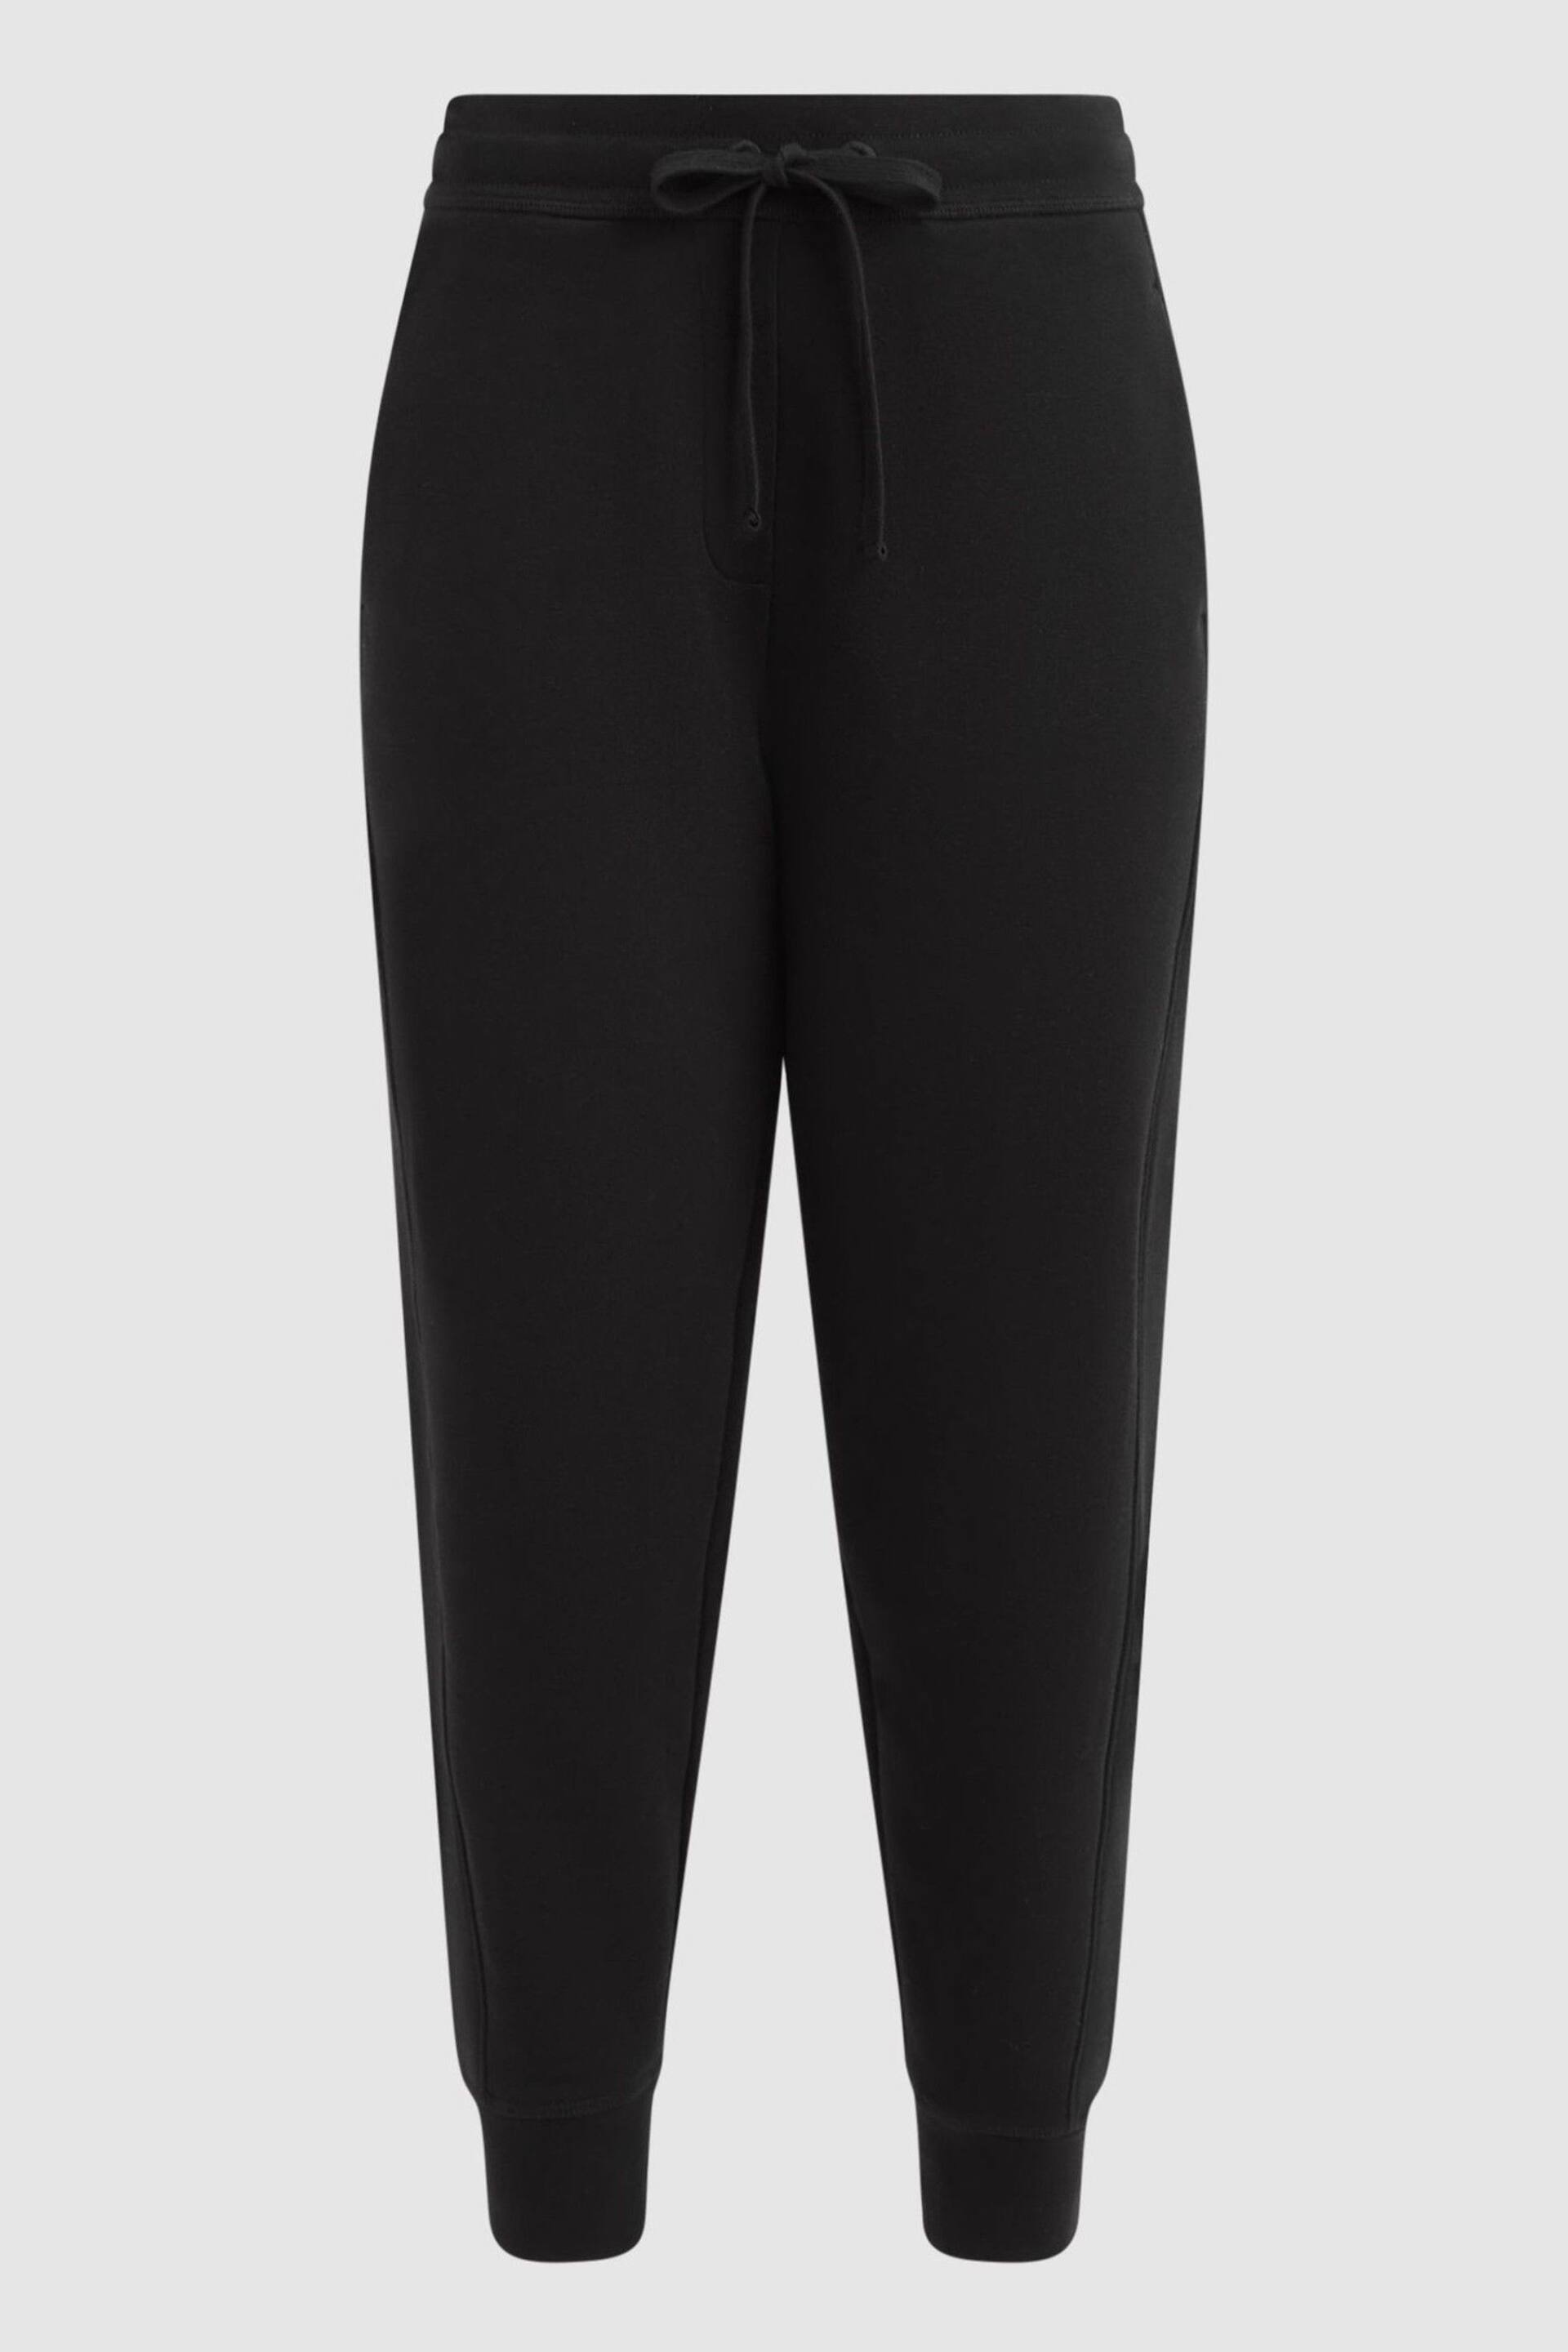 Reiss Black Bronte Cotton Drawstring Cuffed Joggers - Image 2 of 4